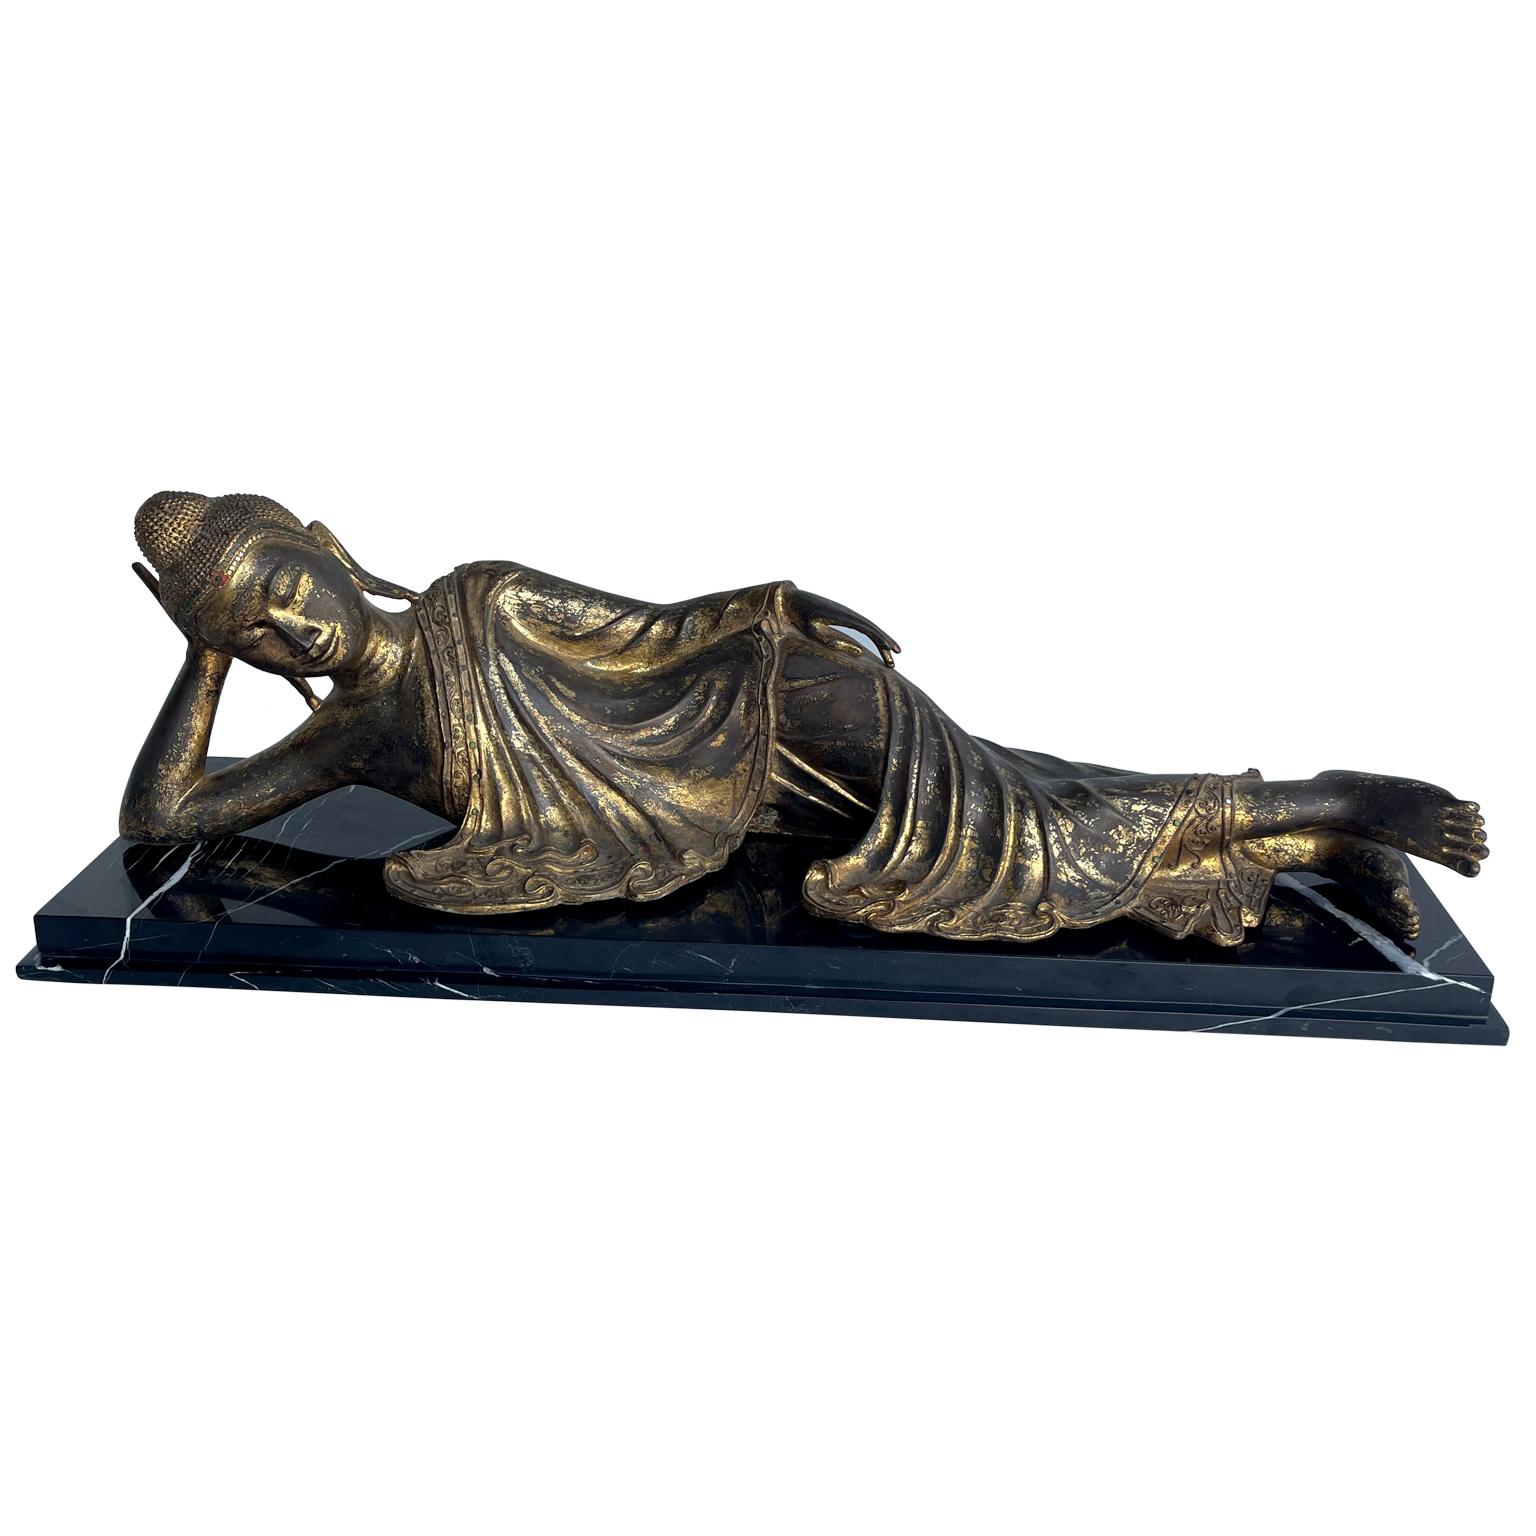 Antique Mandalay Style Gilt Bronze Sculpture of Reclining Buddha on a Heavy Solid Rectangular Profiled Black Marble Base.
The reclining Buddha is draped in a robe with highly detailed forged folds of fabric, and leaving the right shoulder exposed,